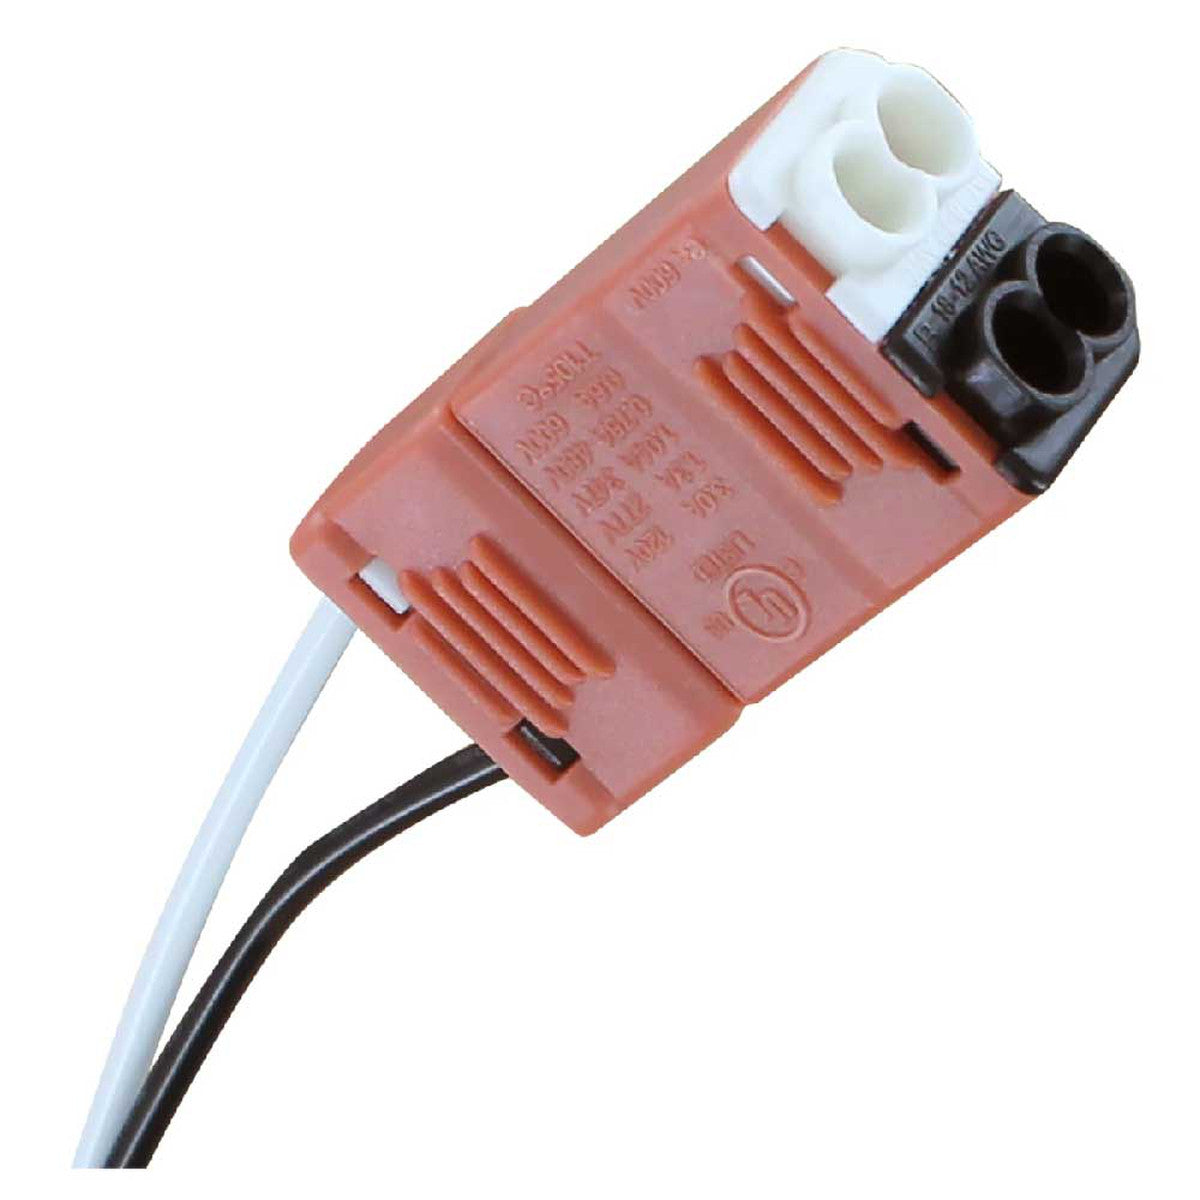 GLT GLT-SOCKET-T8-U-T-2-W 2-Lamp Wiring Harness with Tall Non-shunted Sockets for LED Tubes